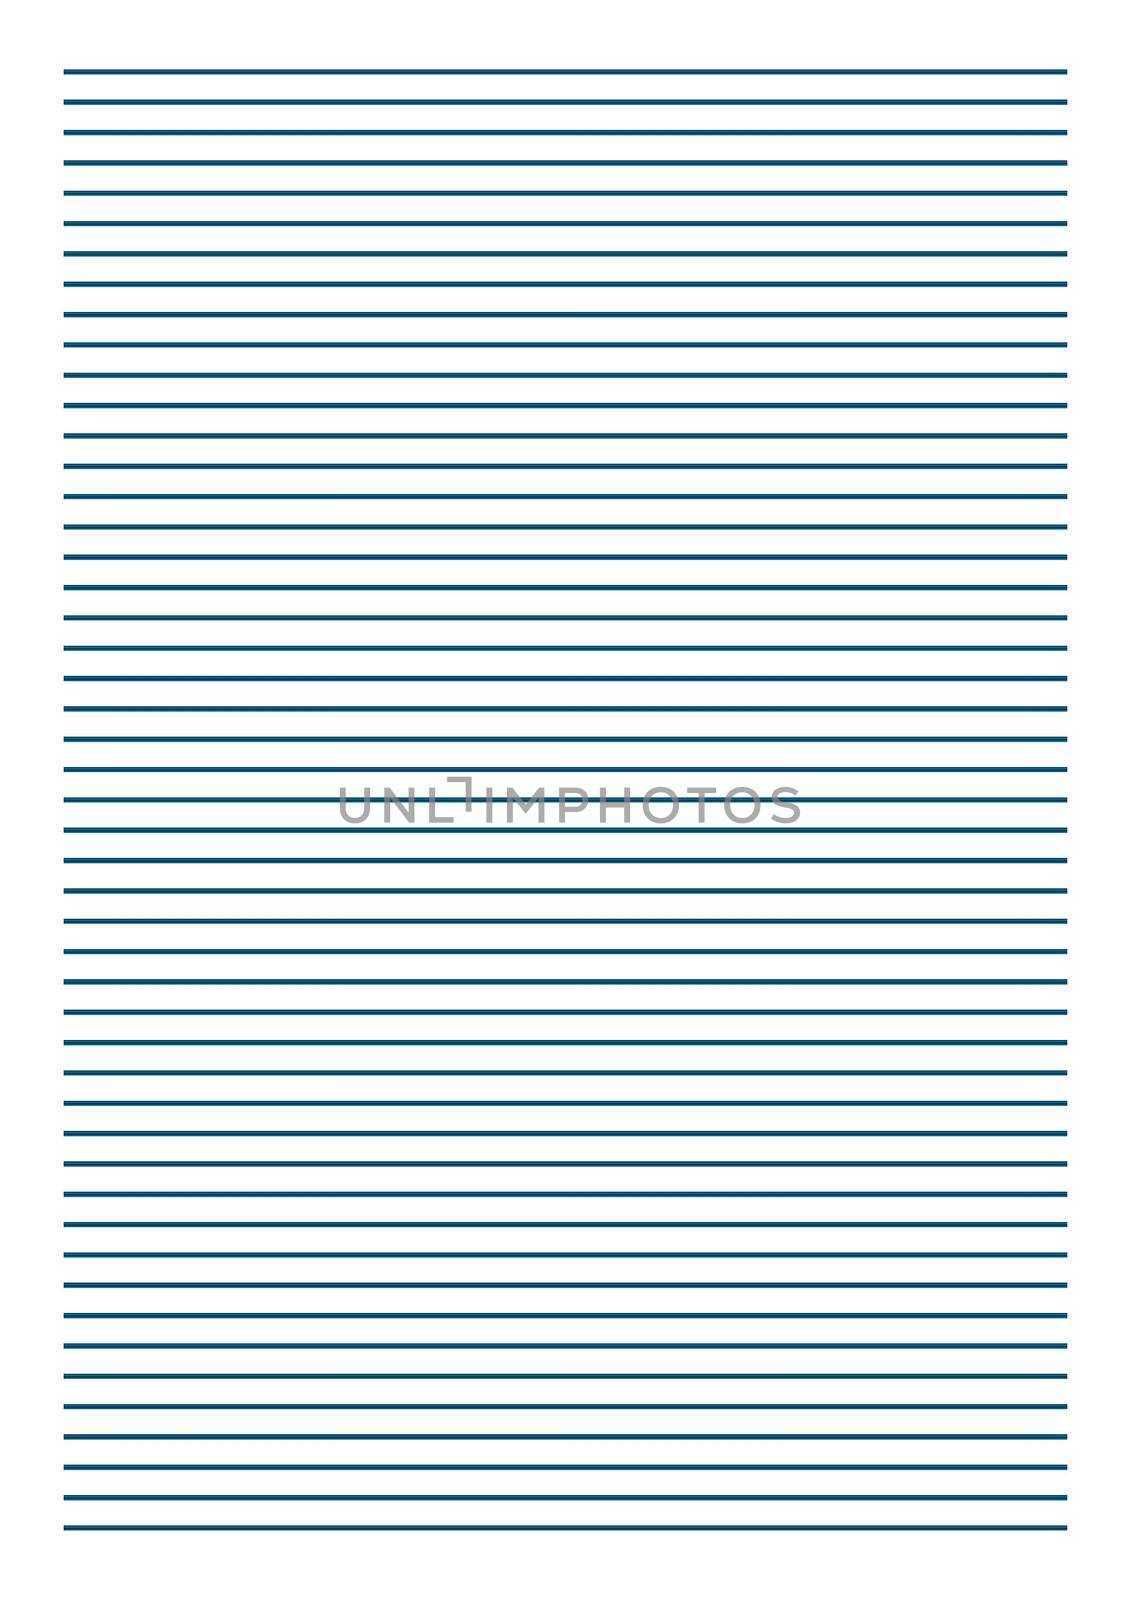 Grid paper. Abstract striped background with color horizontal lines. Lined paper blank on transparent background. White geometric pattern for school, copybooks, notebooks, diary, notes, banners, books